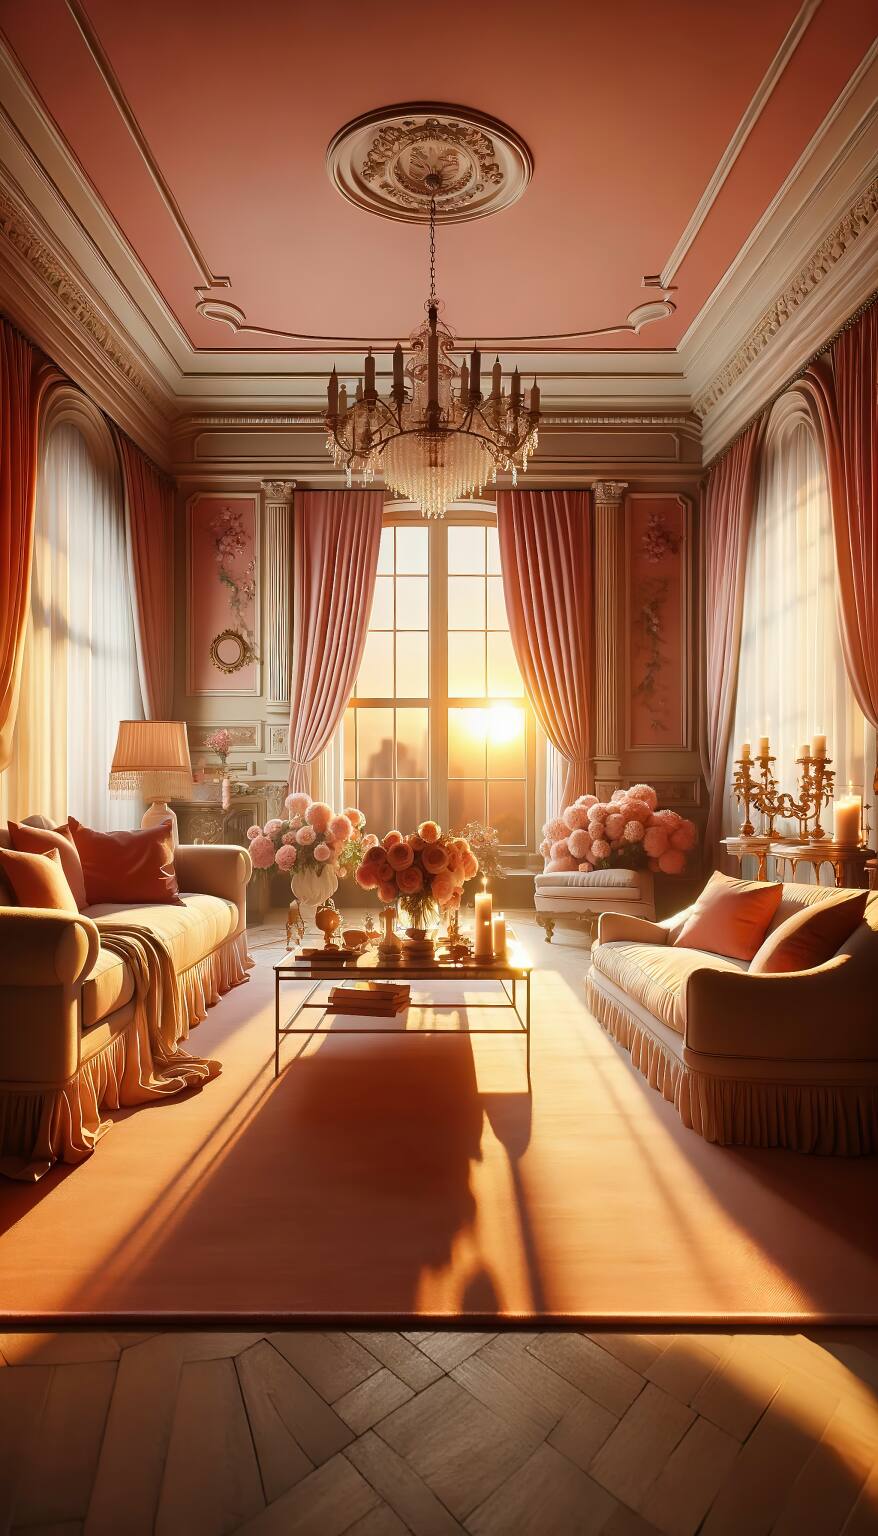 A Romantic Living Room In Warm Coral And Beige Tones, Featuring A Comfortable Sofa, Elegant Armchair, And Chic Coffee Table, Enveloped In A Serene Sunset Ambiance.